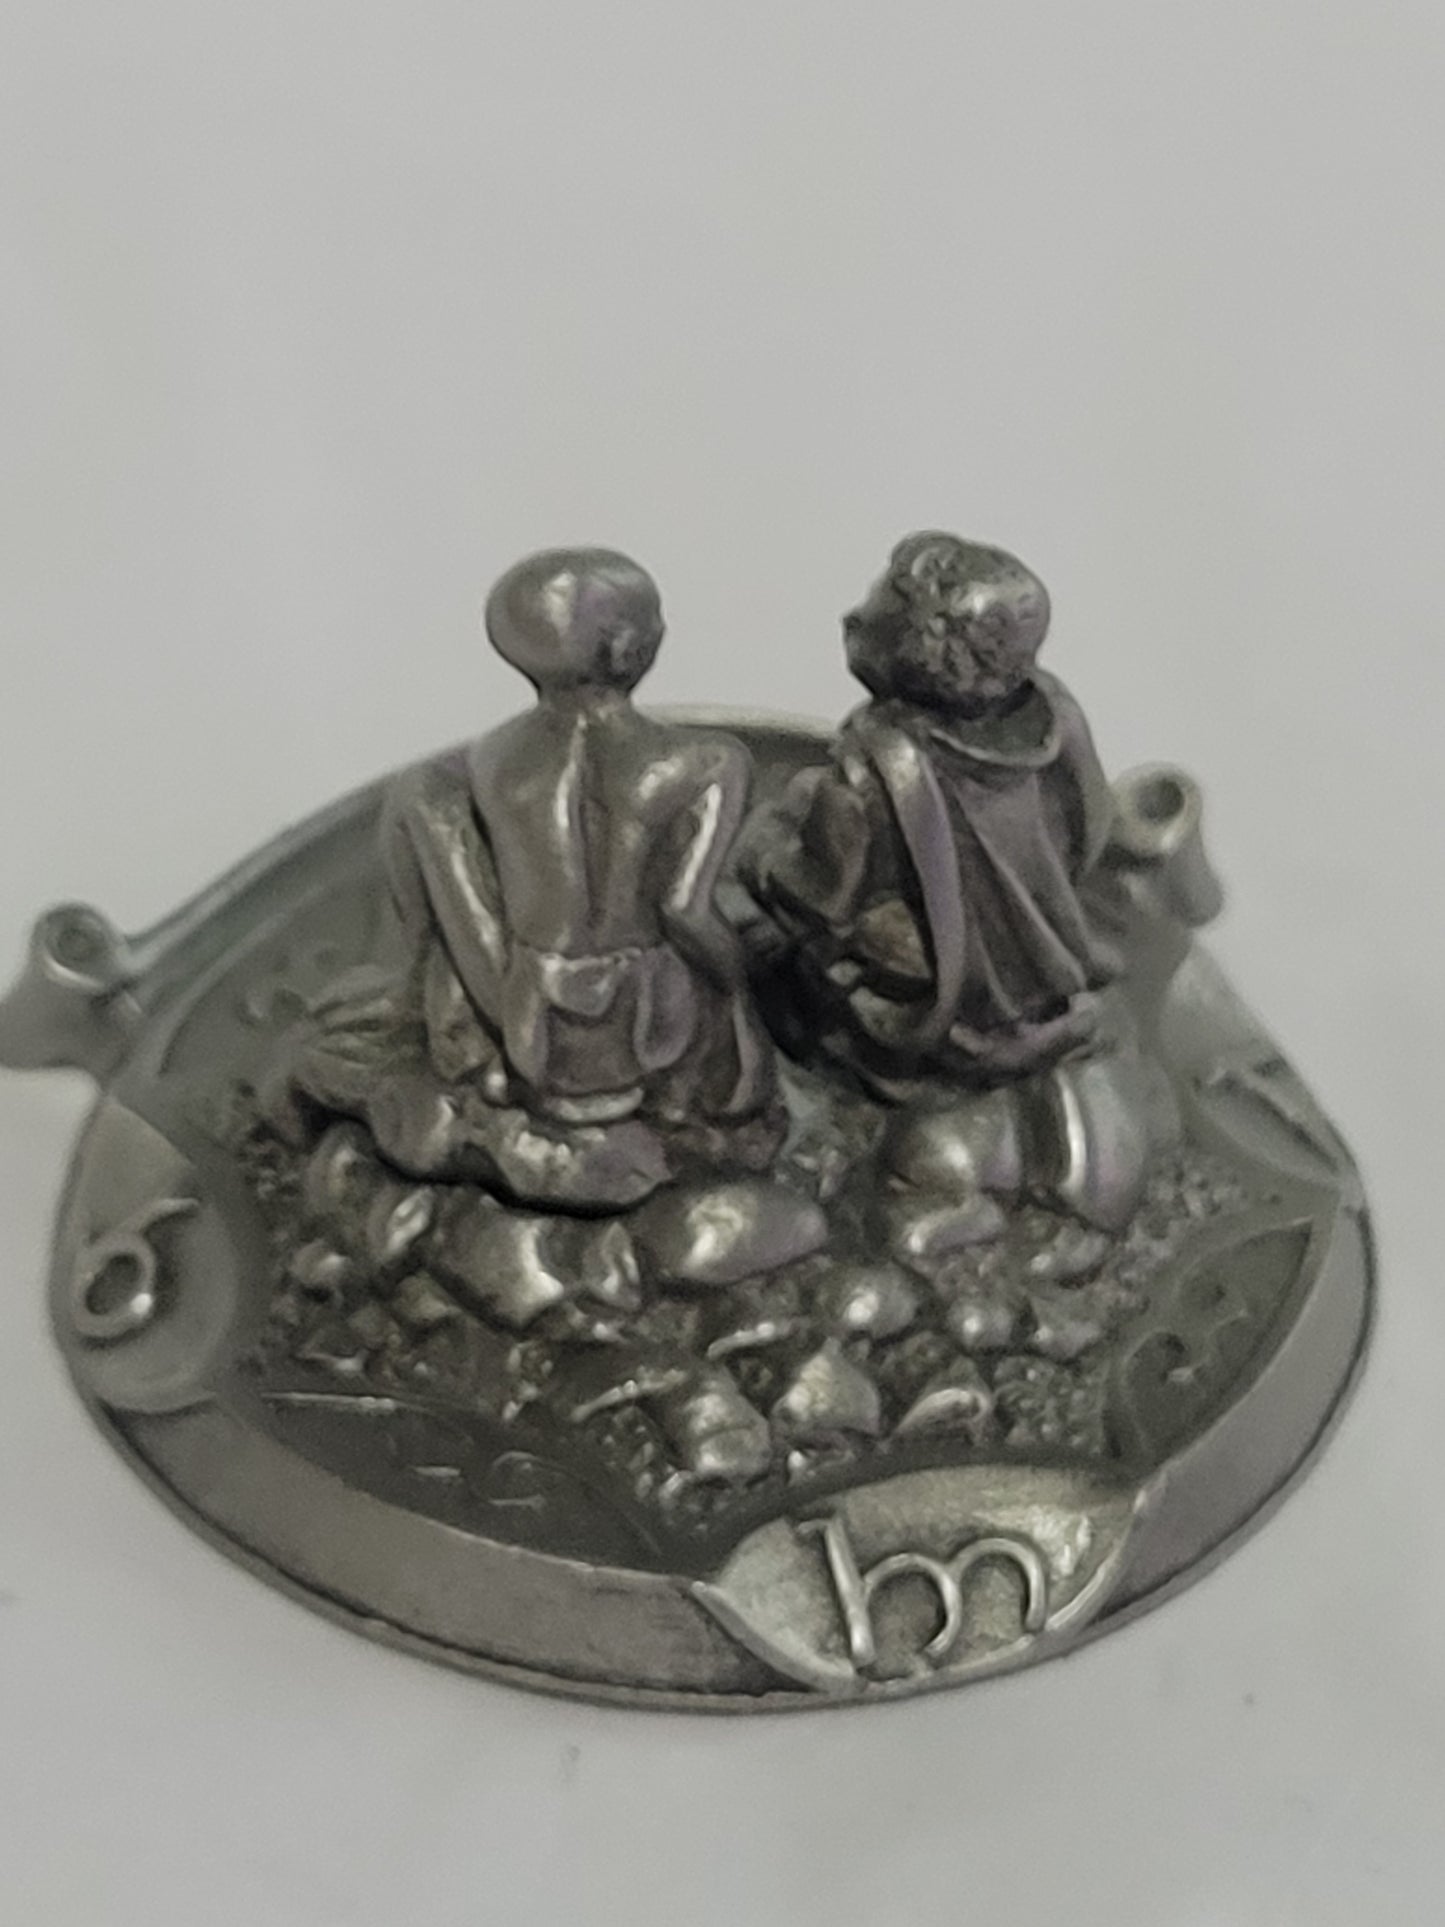 Bilbo & Gollum from the Lord of the Rings by Rawcliffe, Pewter Figurine